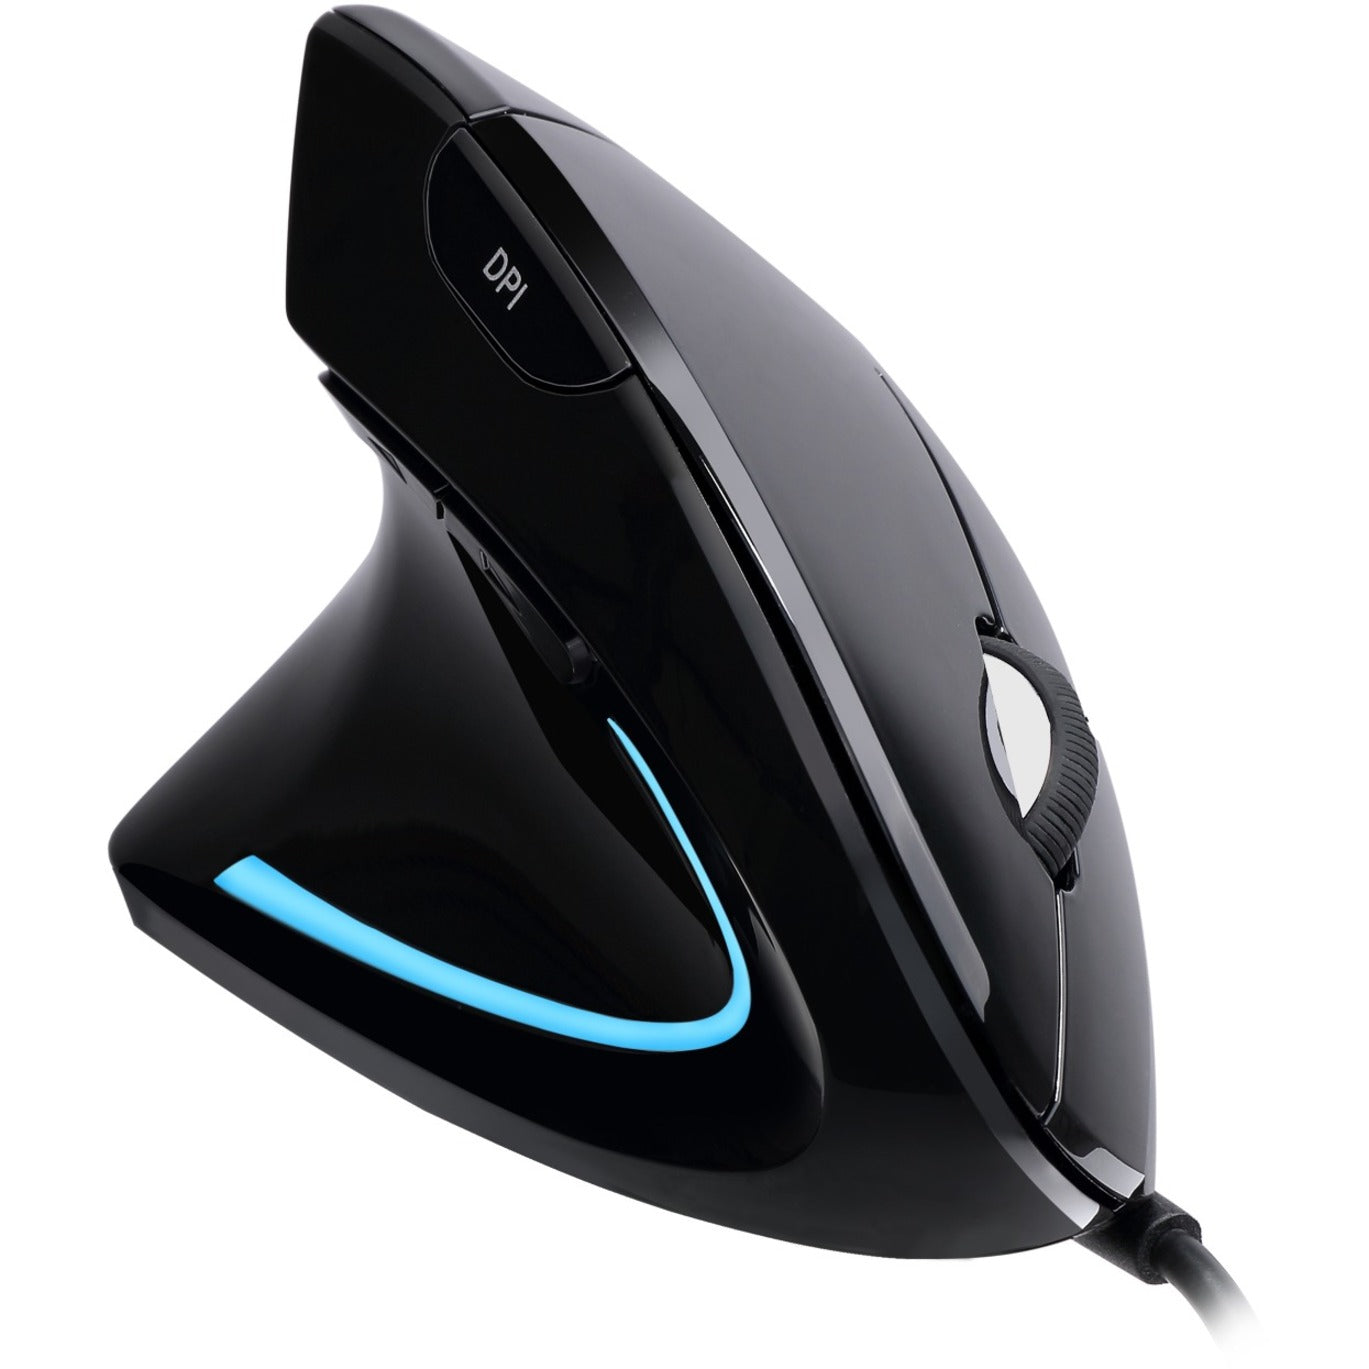 Adesso Left-Handed Vertical Ergonomic Mouse [Discontinued]